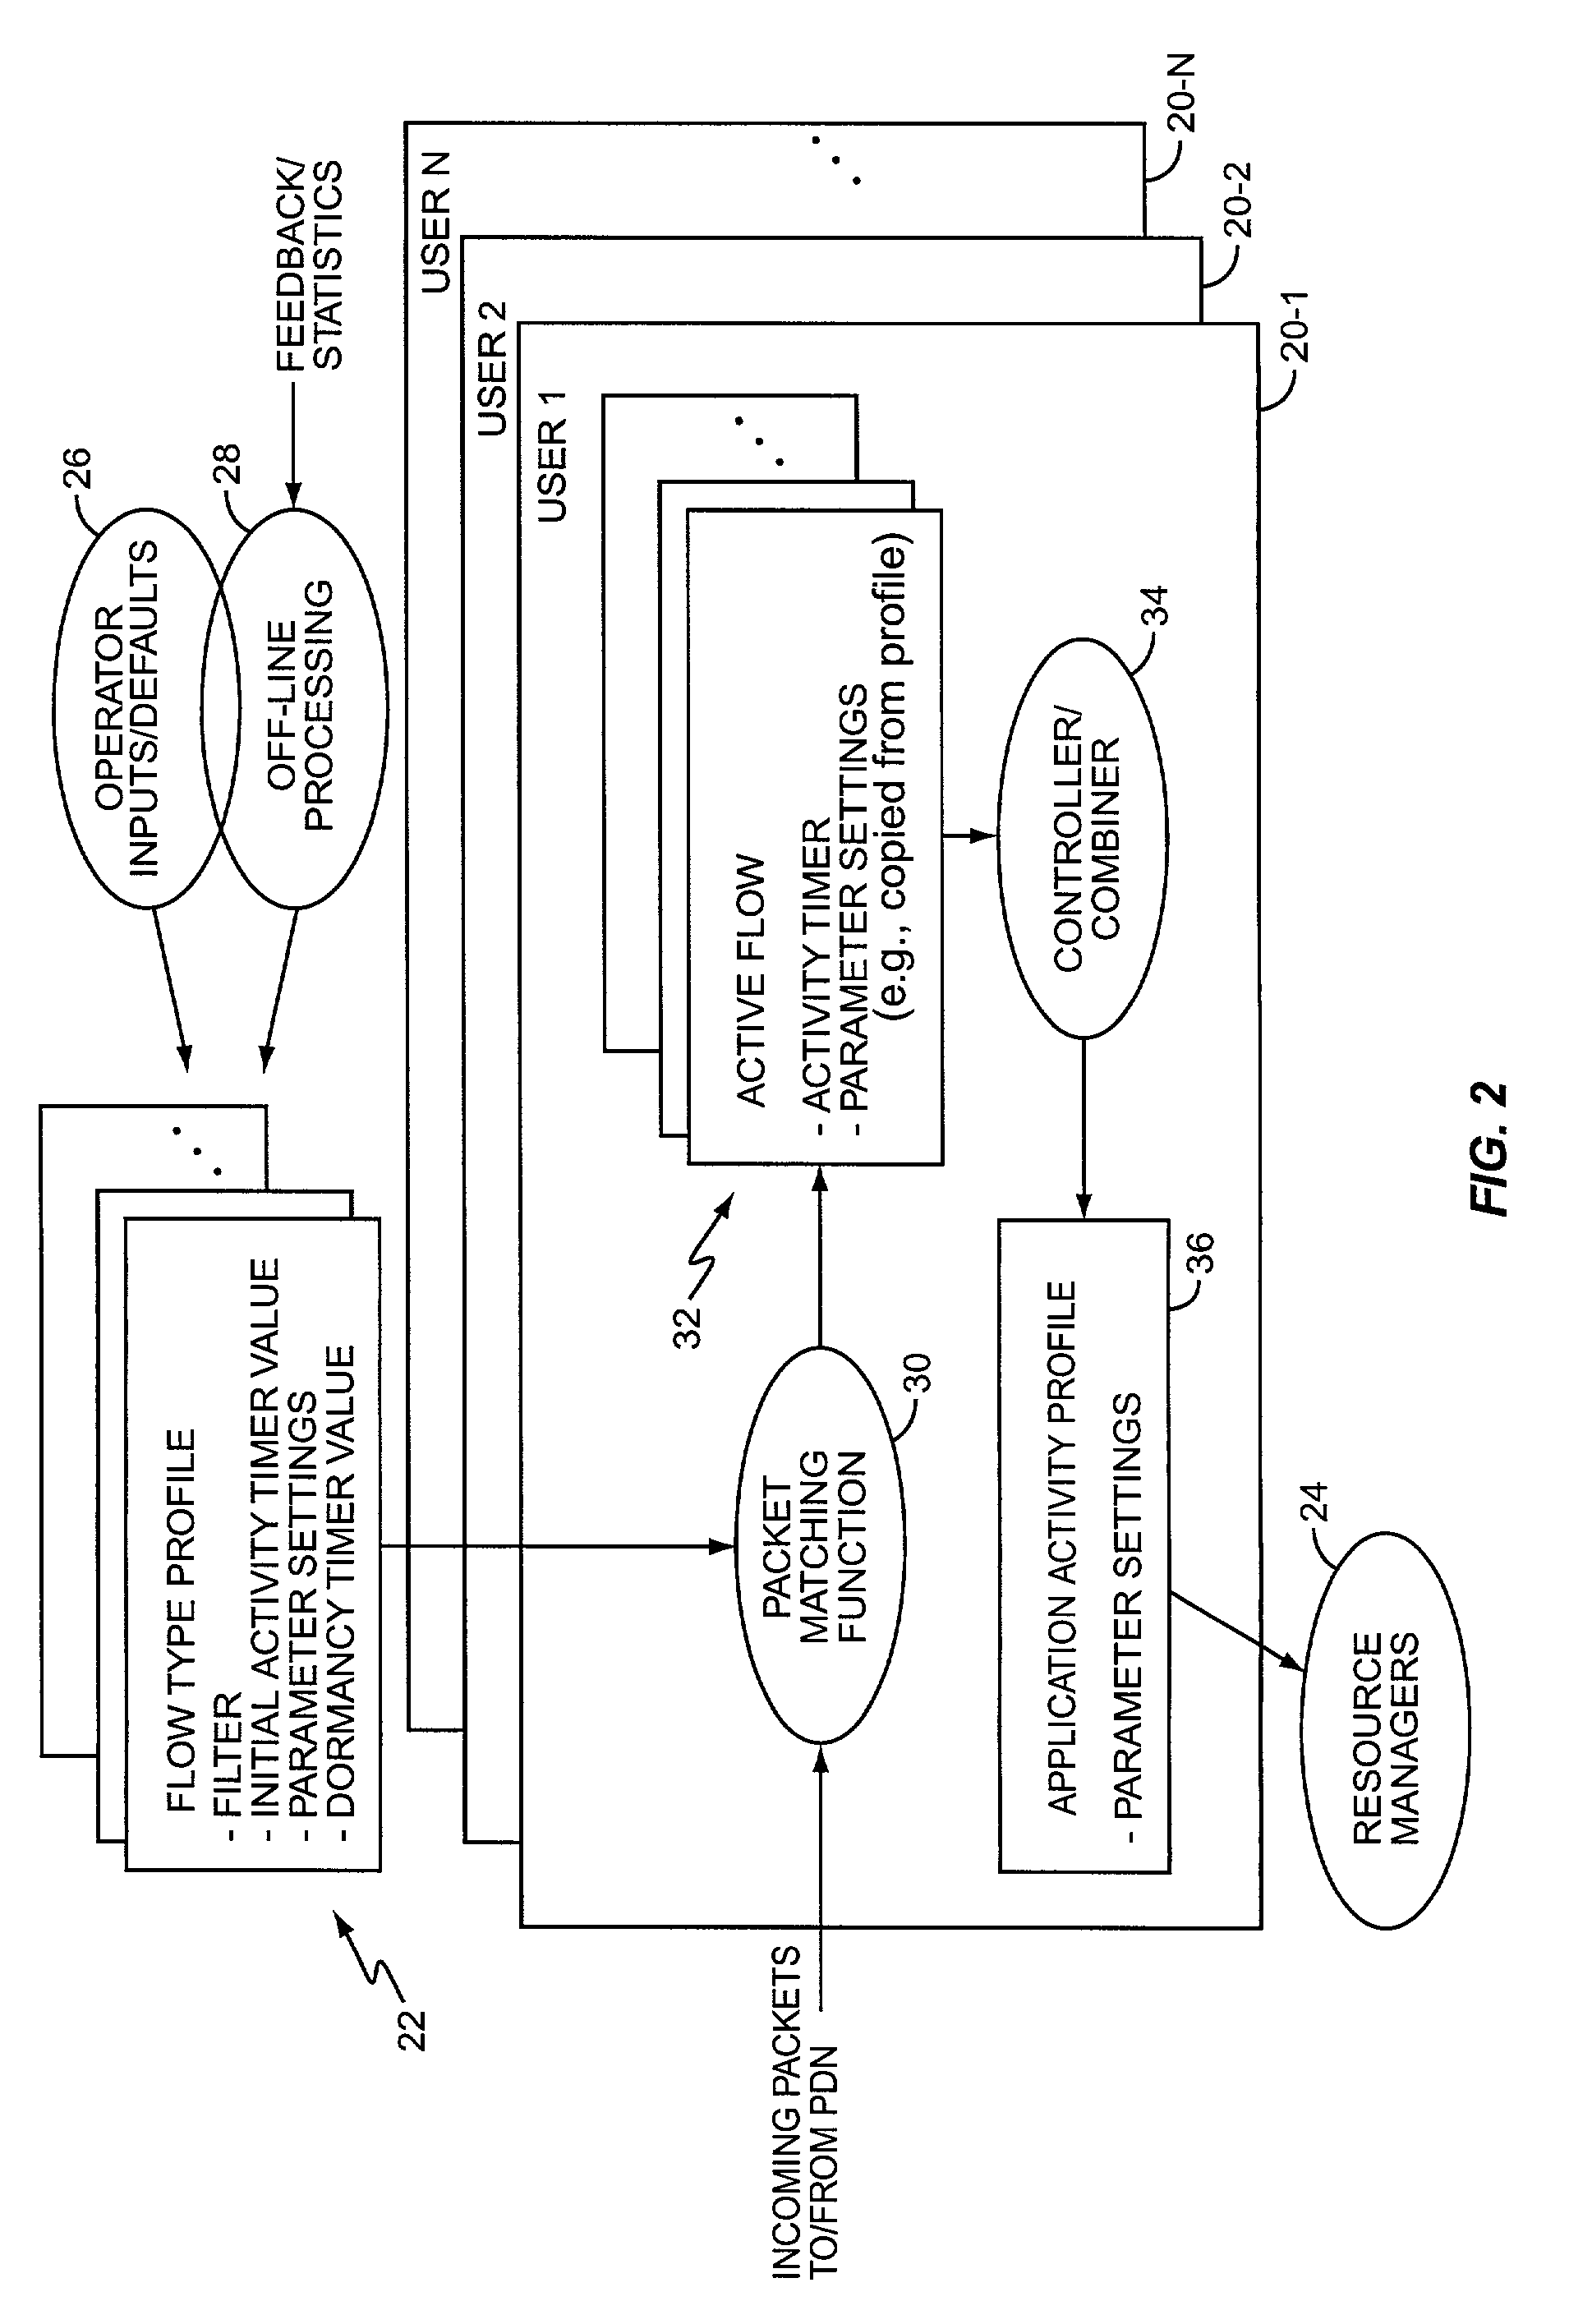 Applications based radio resource management in a wireless communication network